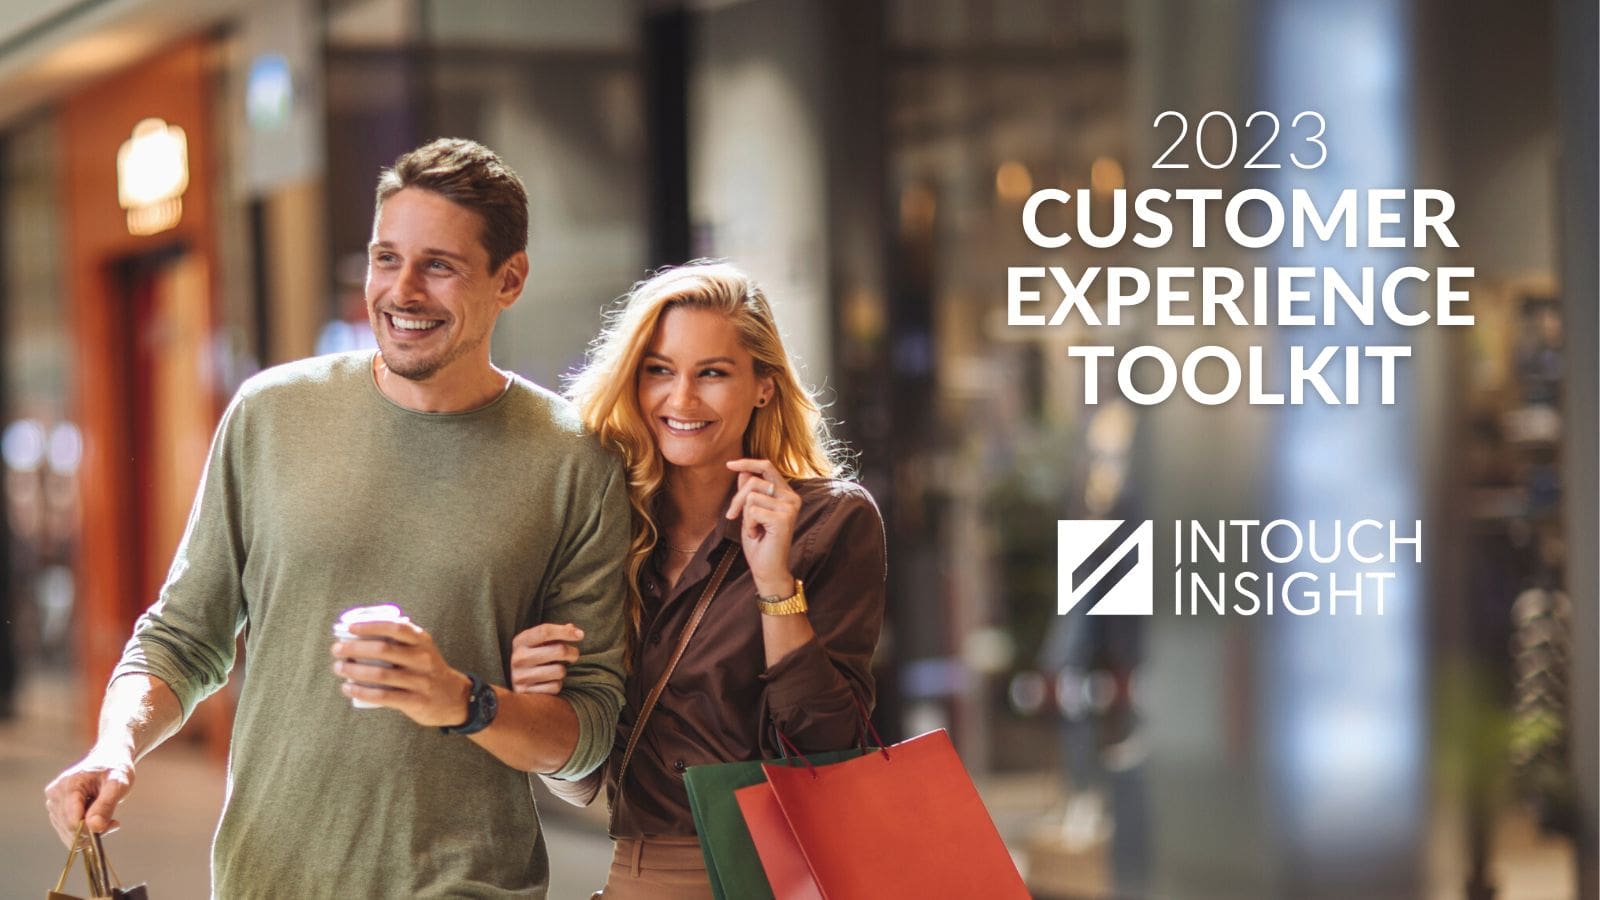 The all new Customer Experience Toolkit for 2023 by Intouch Insight